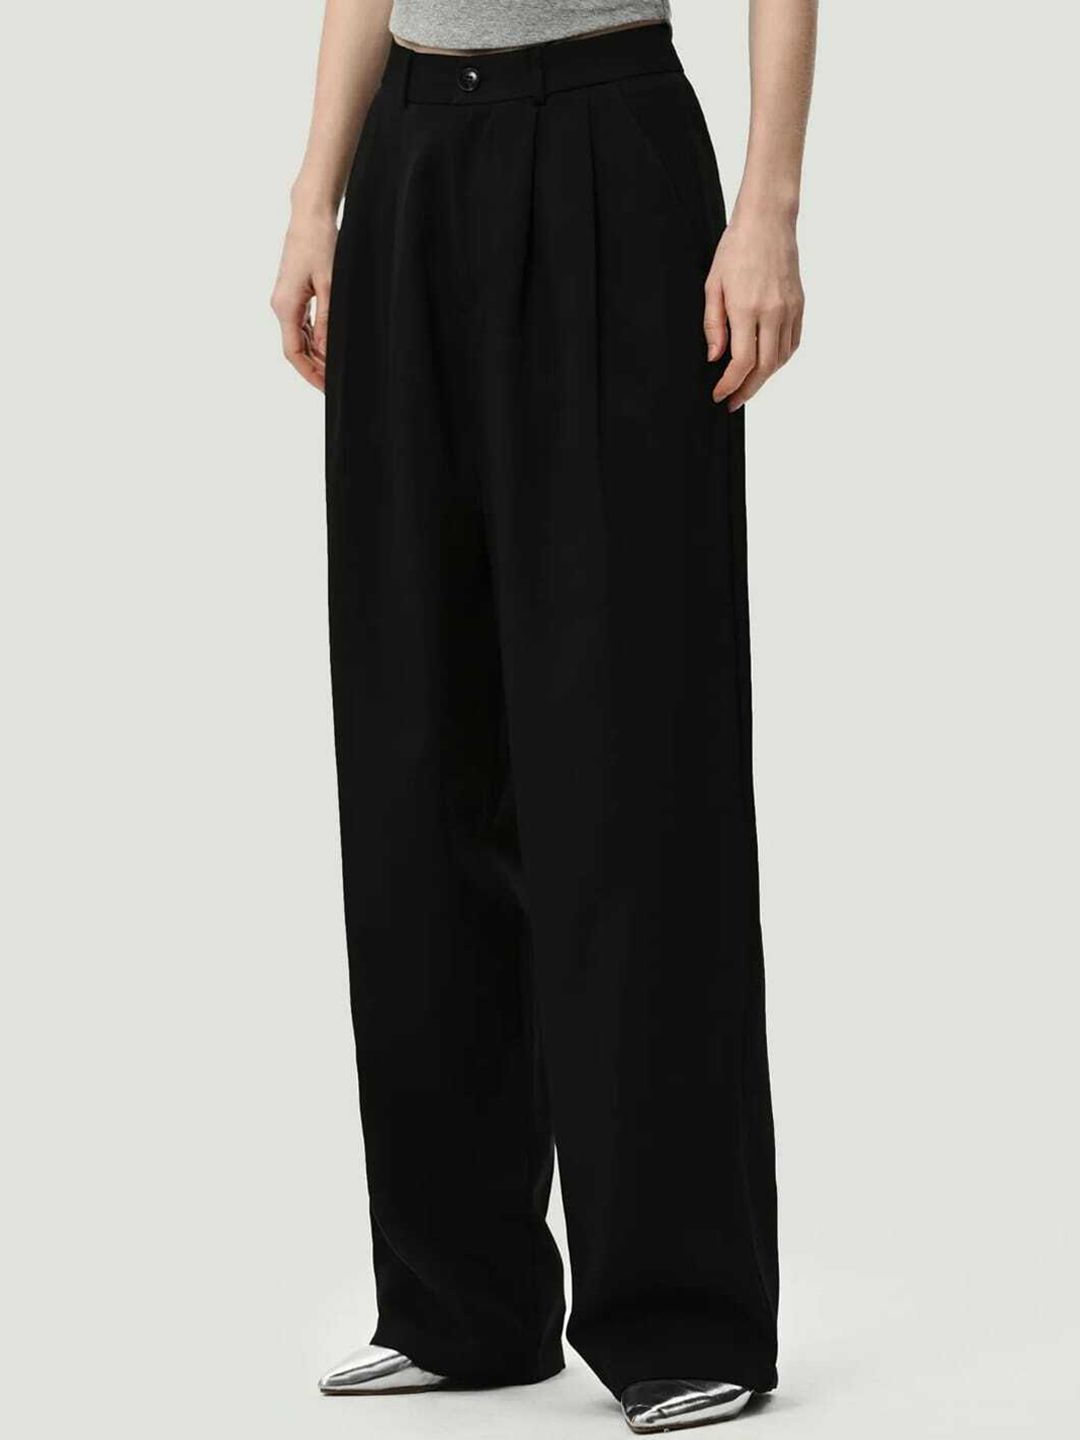 Next One Women Black Smart Loose Fit High-Rise Easy Wash Trousers Price in India